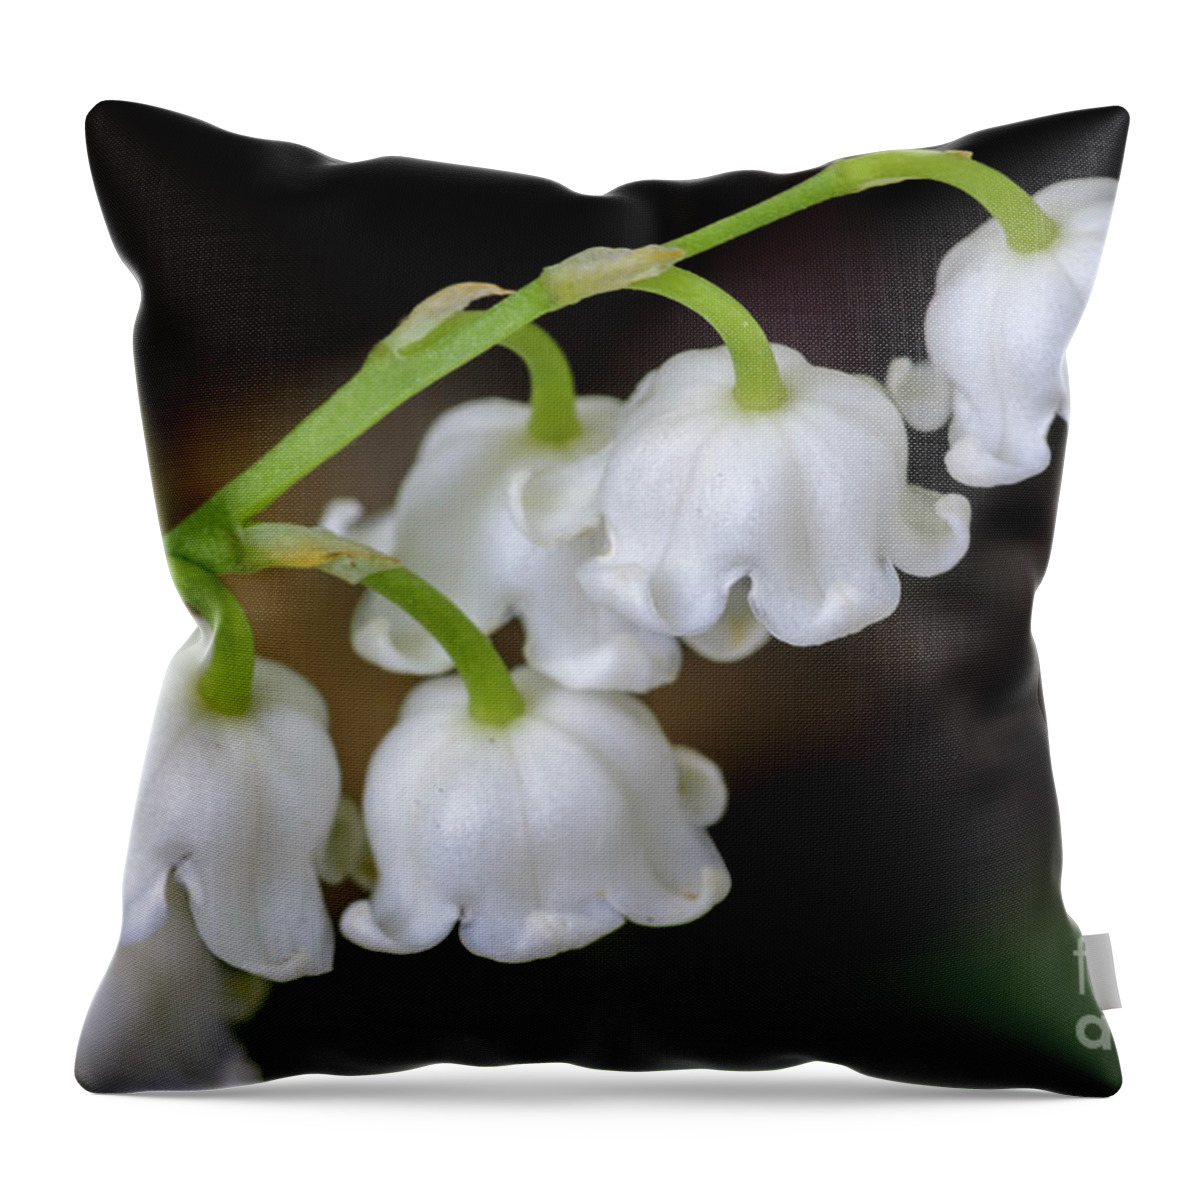 Lily Of The Valley Throw Pillow featuring the photograph Lily Of The Valley Flowers by Tamara Becker